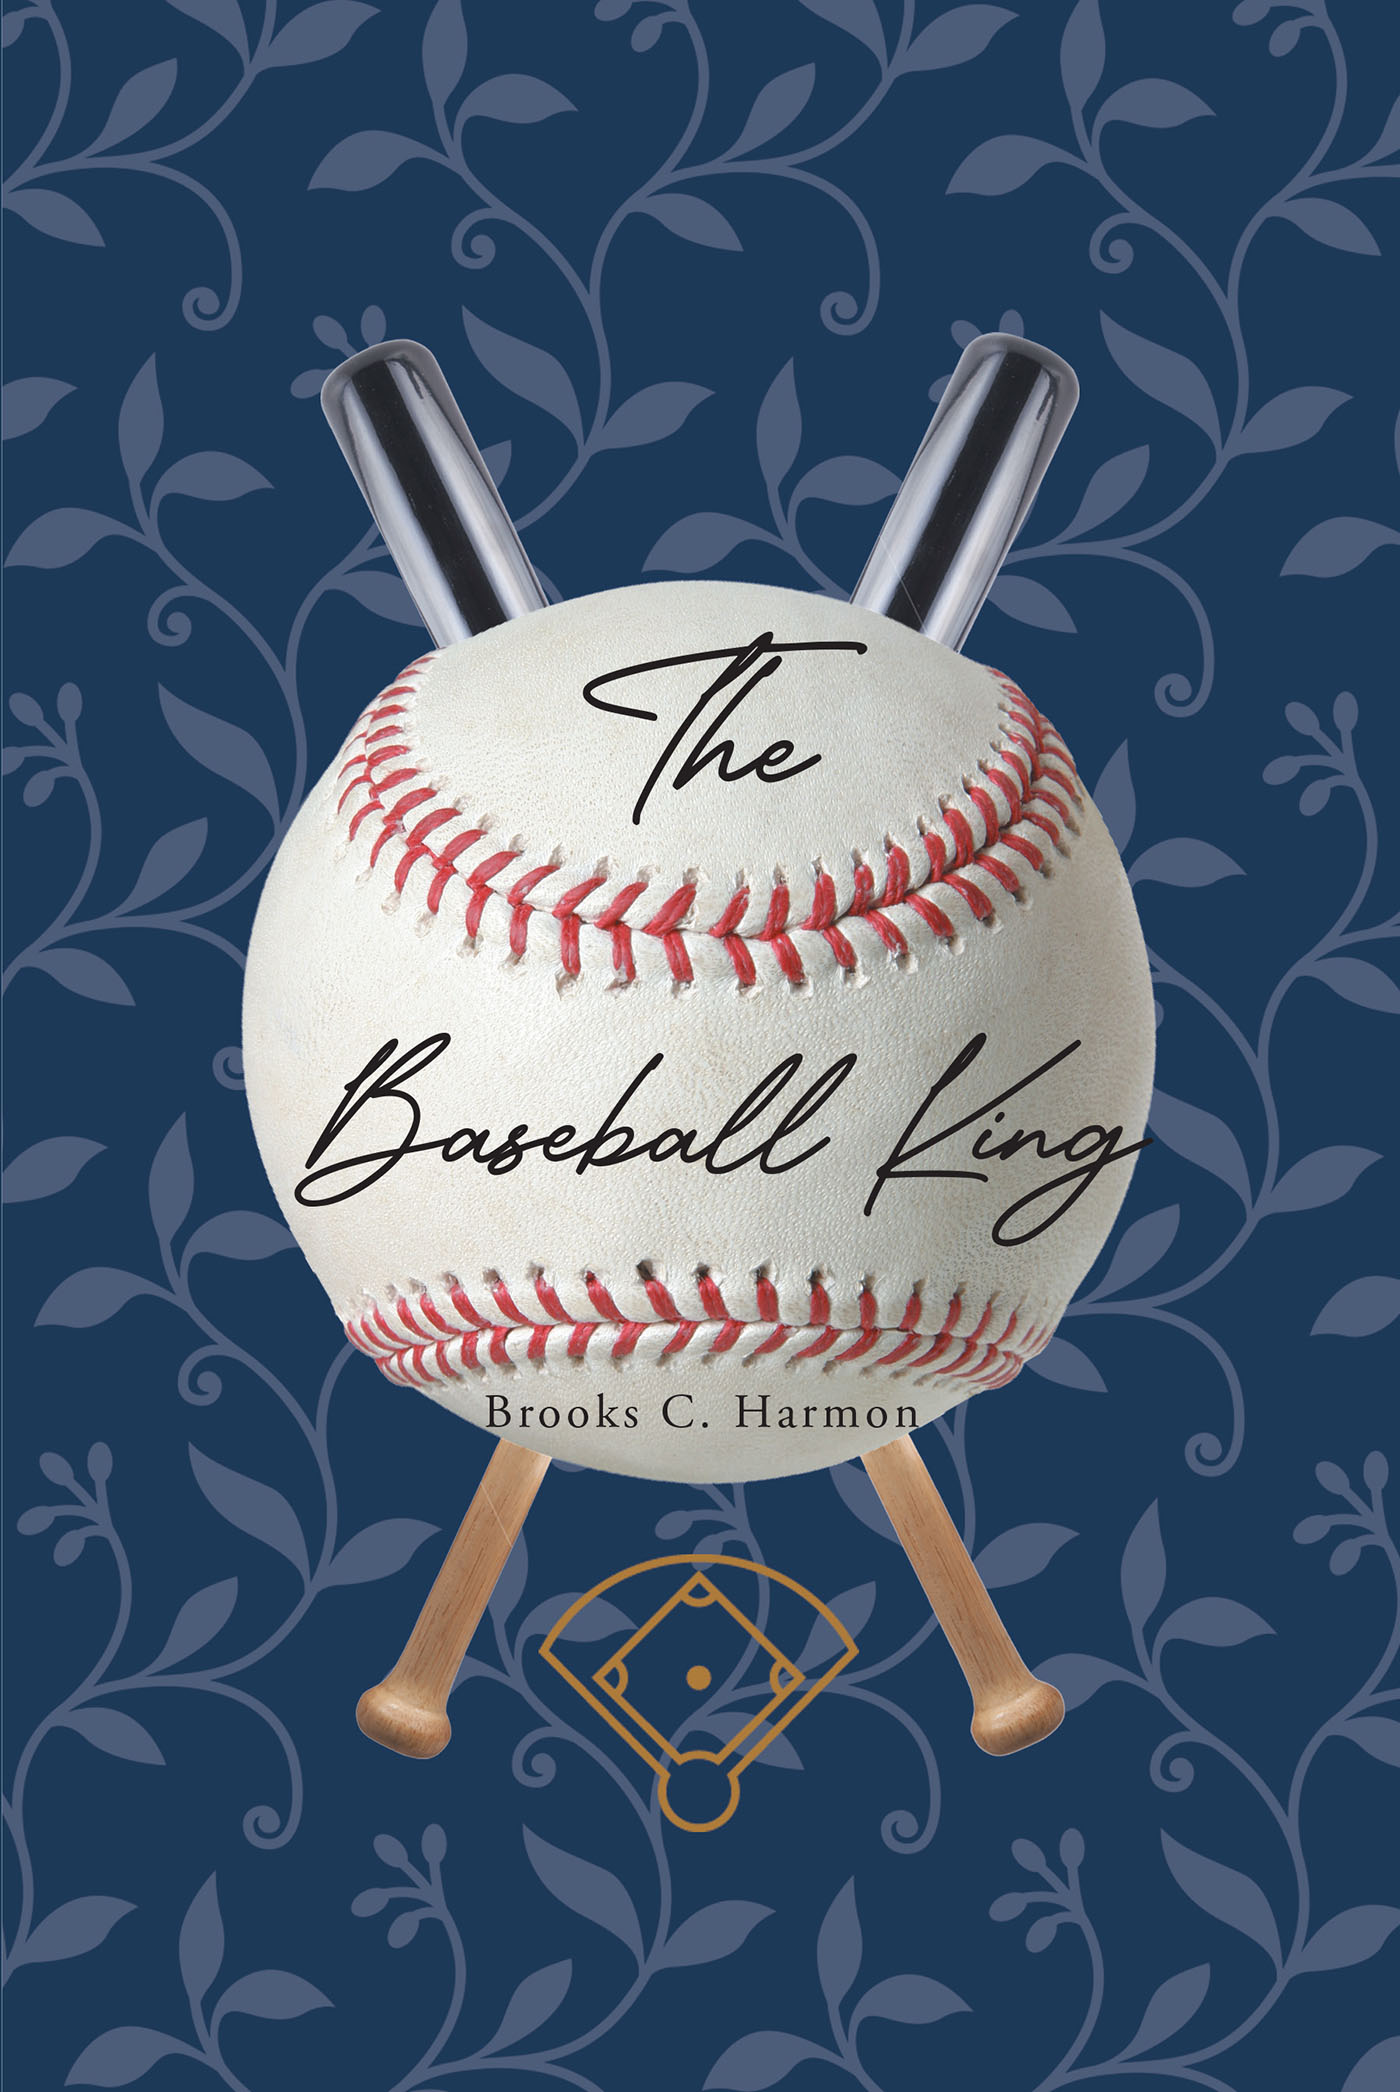 Brooks C. Harmon’s Newly Released "The Baseball King" is an Engaging Tale of Family, Faith, and the Joys of Baseball